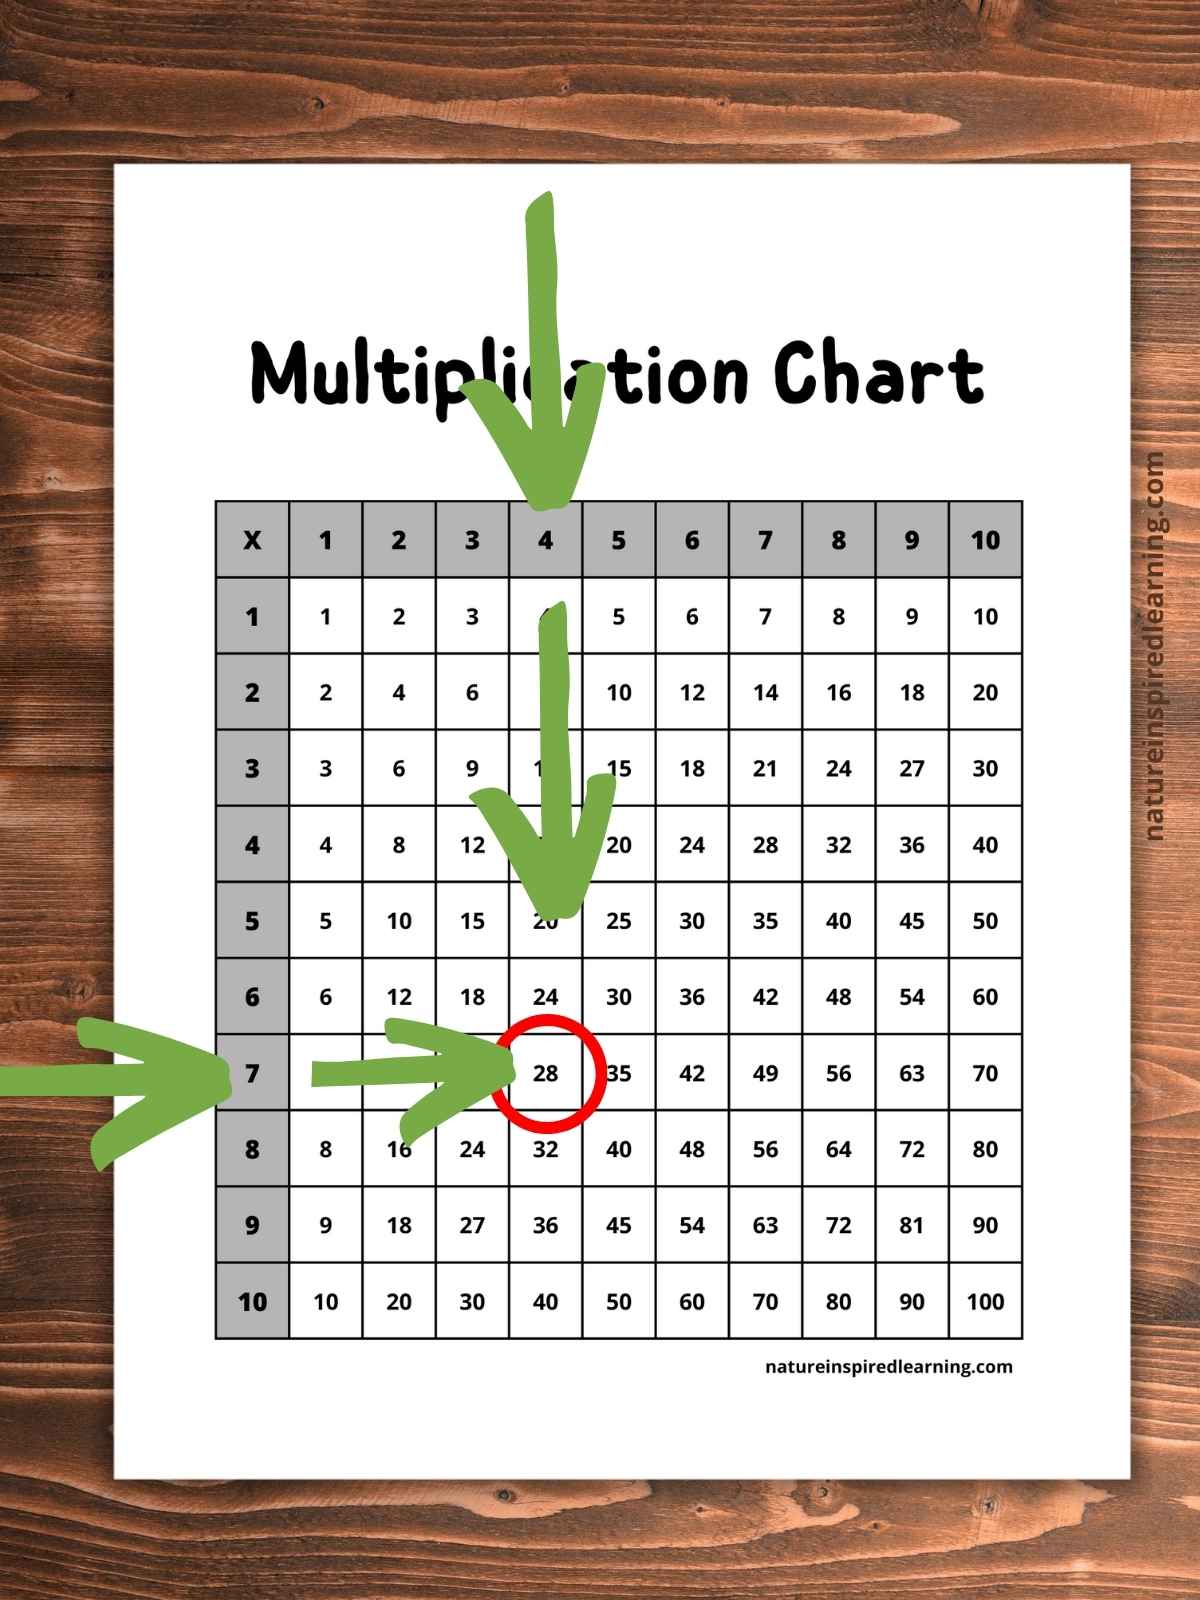 multiplication table on a wooden background with green arrows pointing at number 7 on the left had side and green arrows pointing at number 4 in the first row across the top. A green arrow pointing over to number 28 and a green arrow pointing down towards number 28. 28 circled in a red outline.